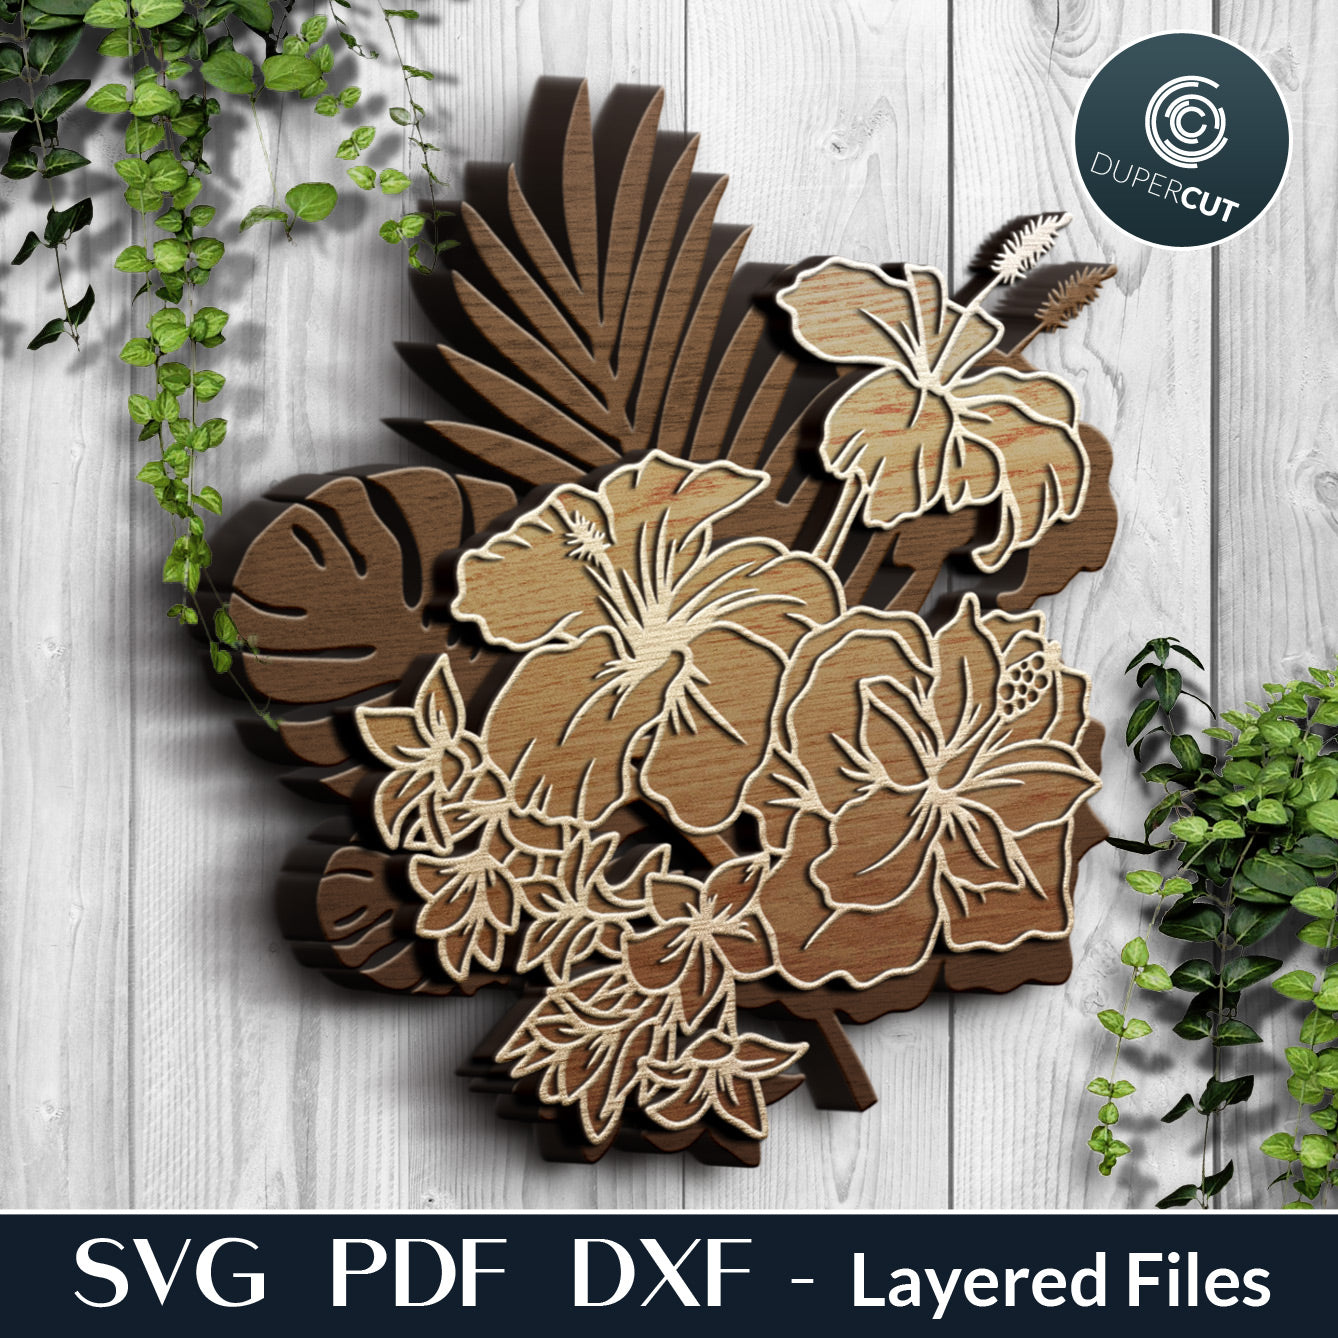 Tropical arrangement - layered cut files by DuperCut - SVG PDF DXF vector template for Glowforge, laser cutting machines, engraving, Cricut, Silhouette cameo